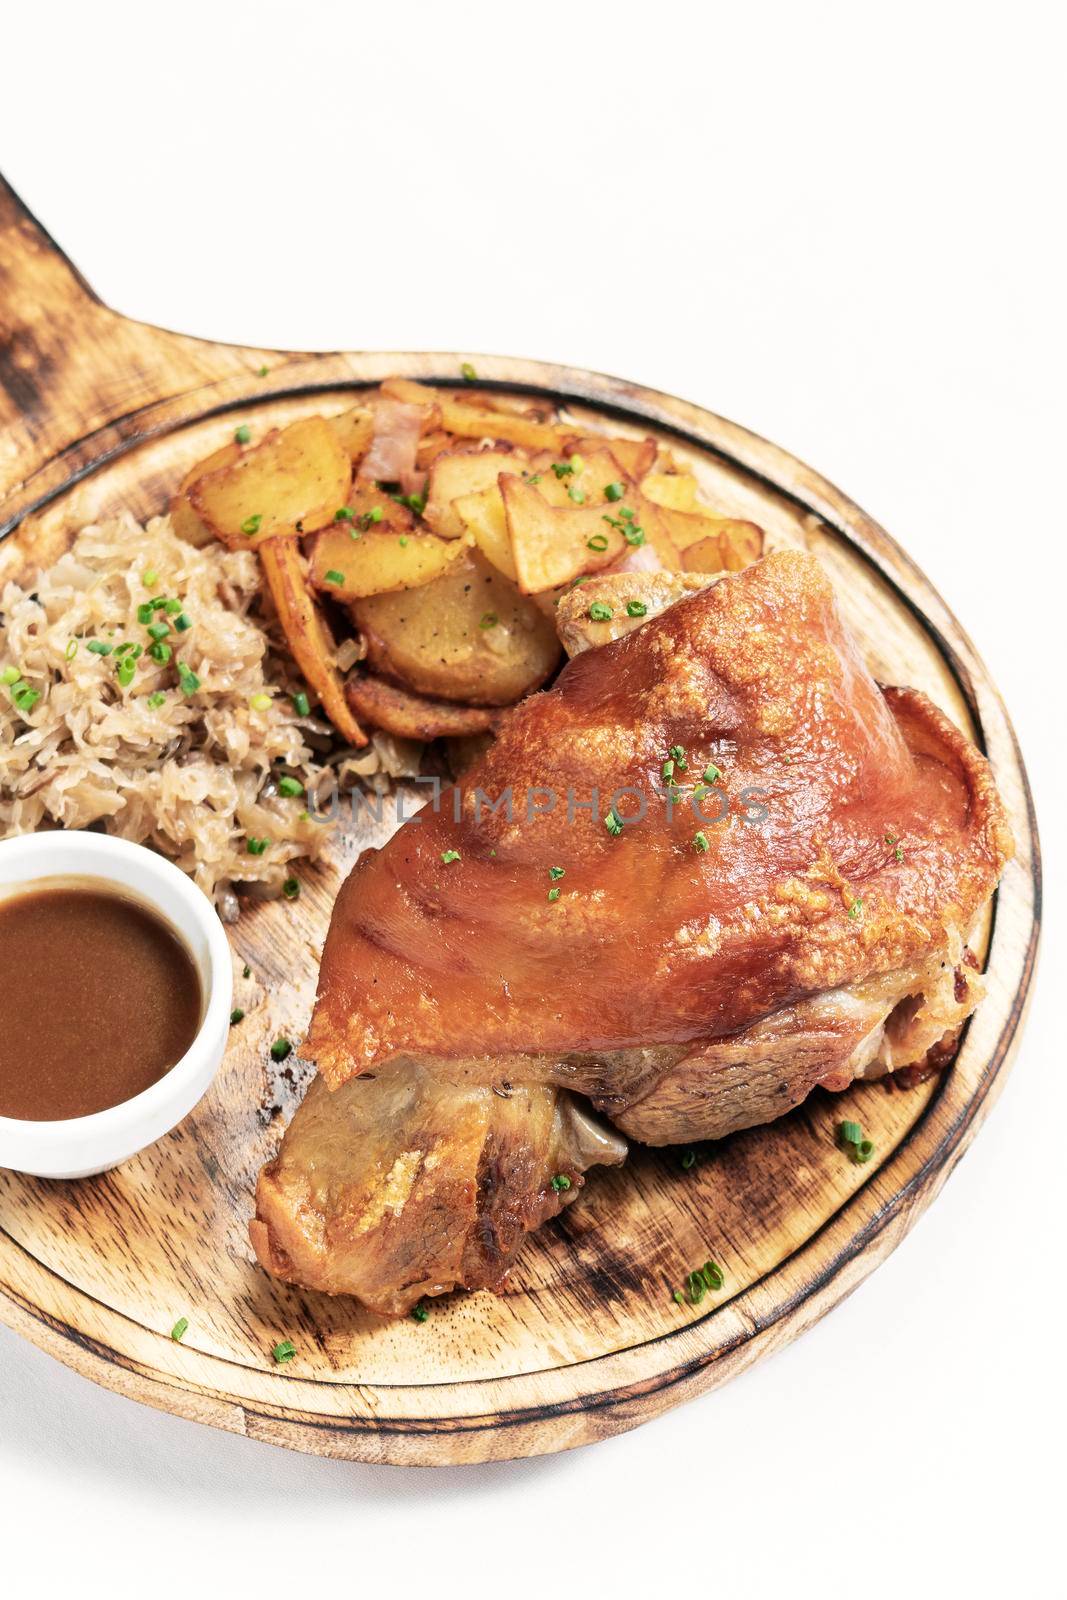 SCHWEINSHAXE traditional german pork knuckle with sauerkraut and potatoes meal on white background